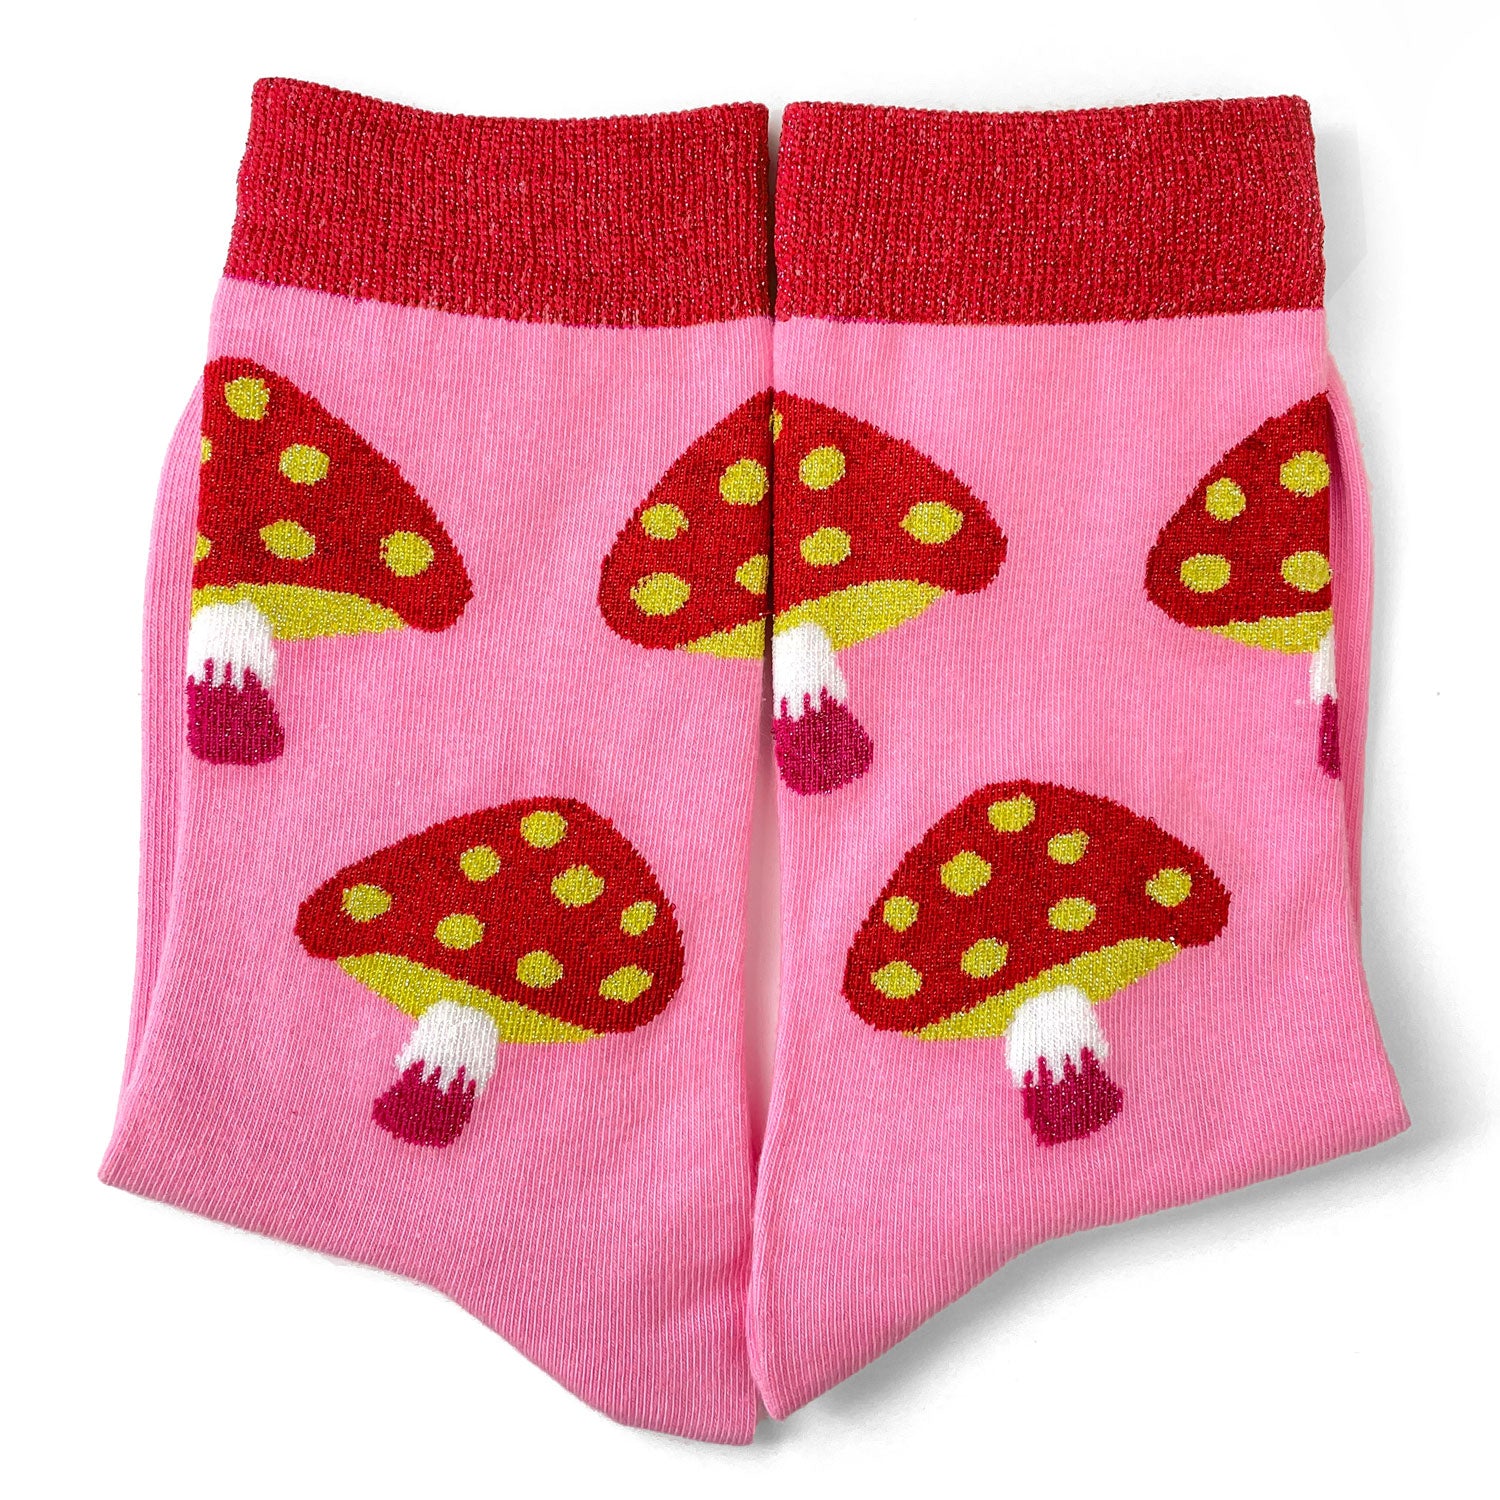 Pink and red socks with mushrooms.